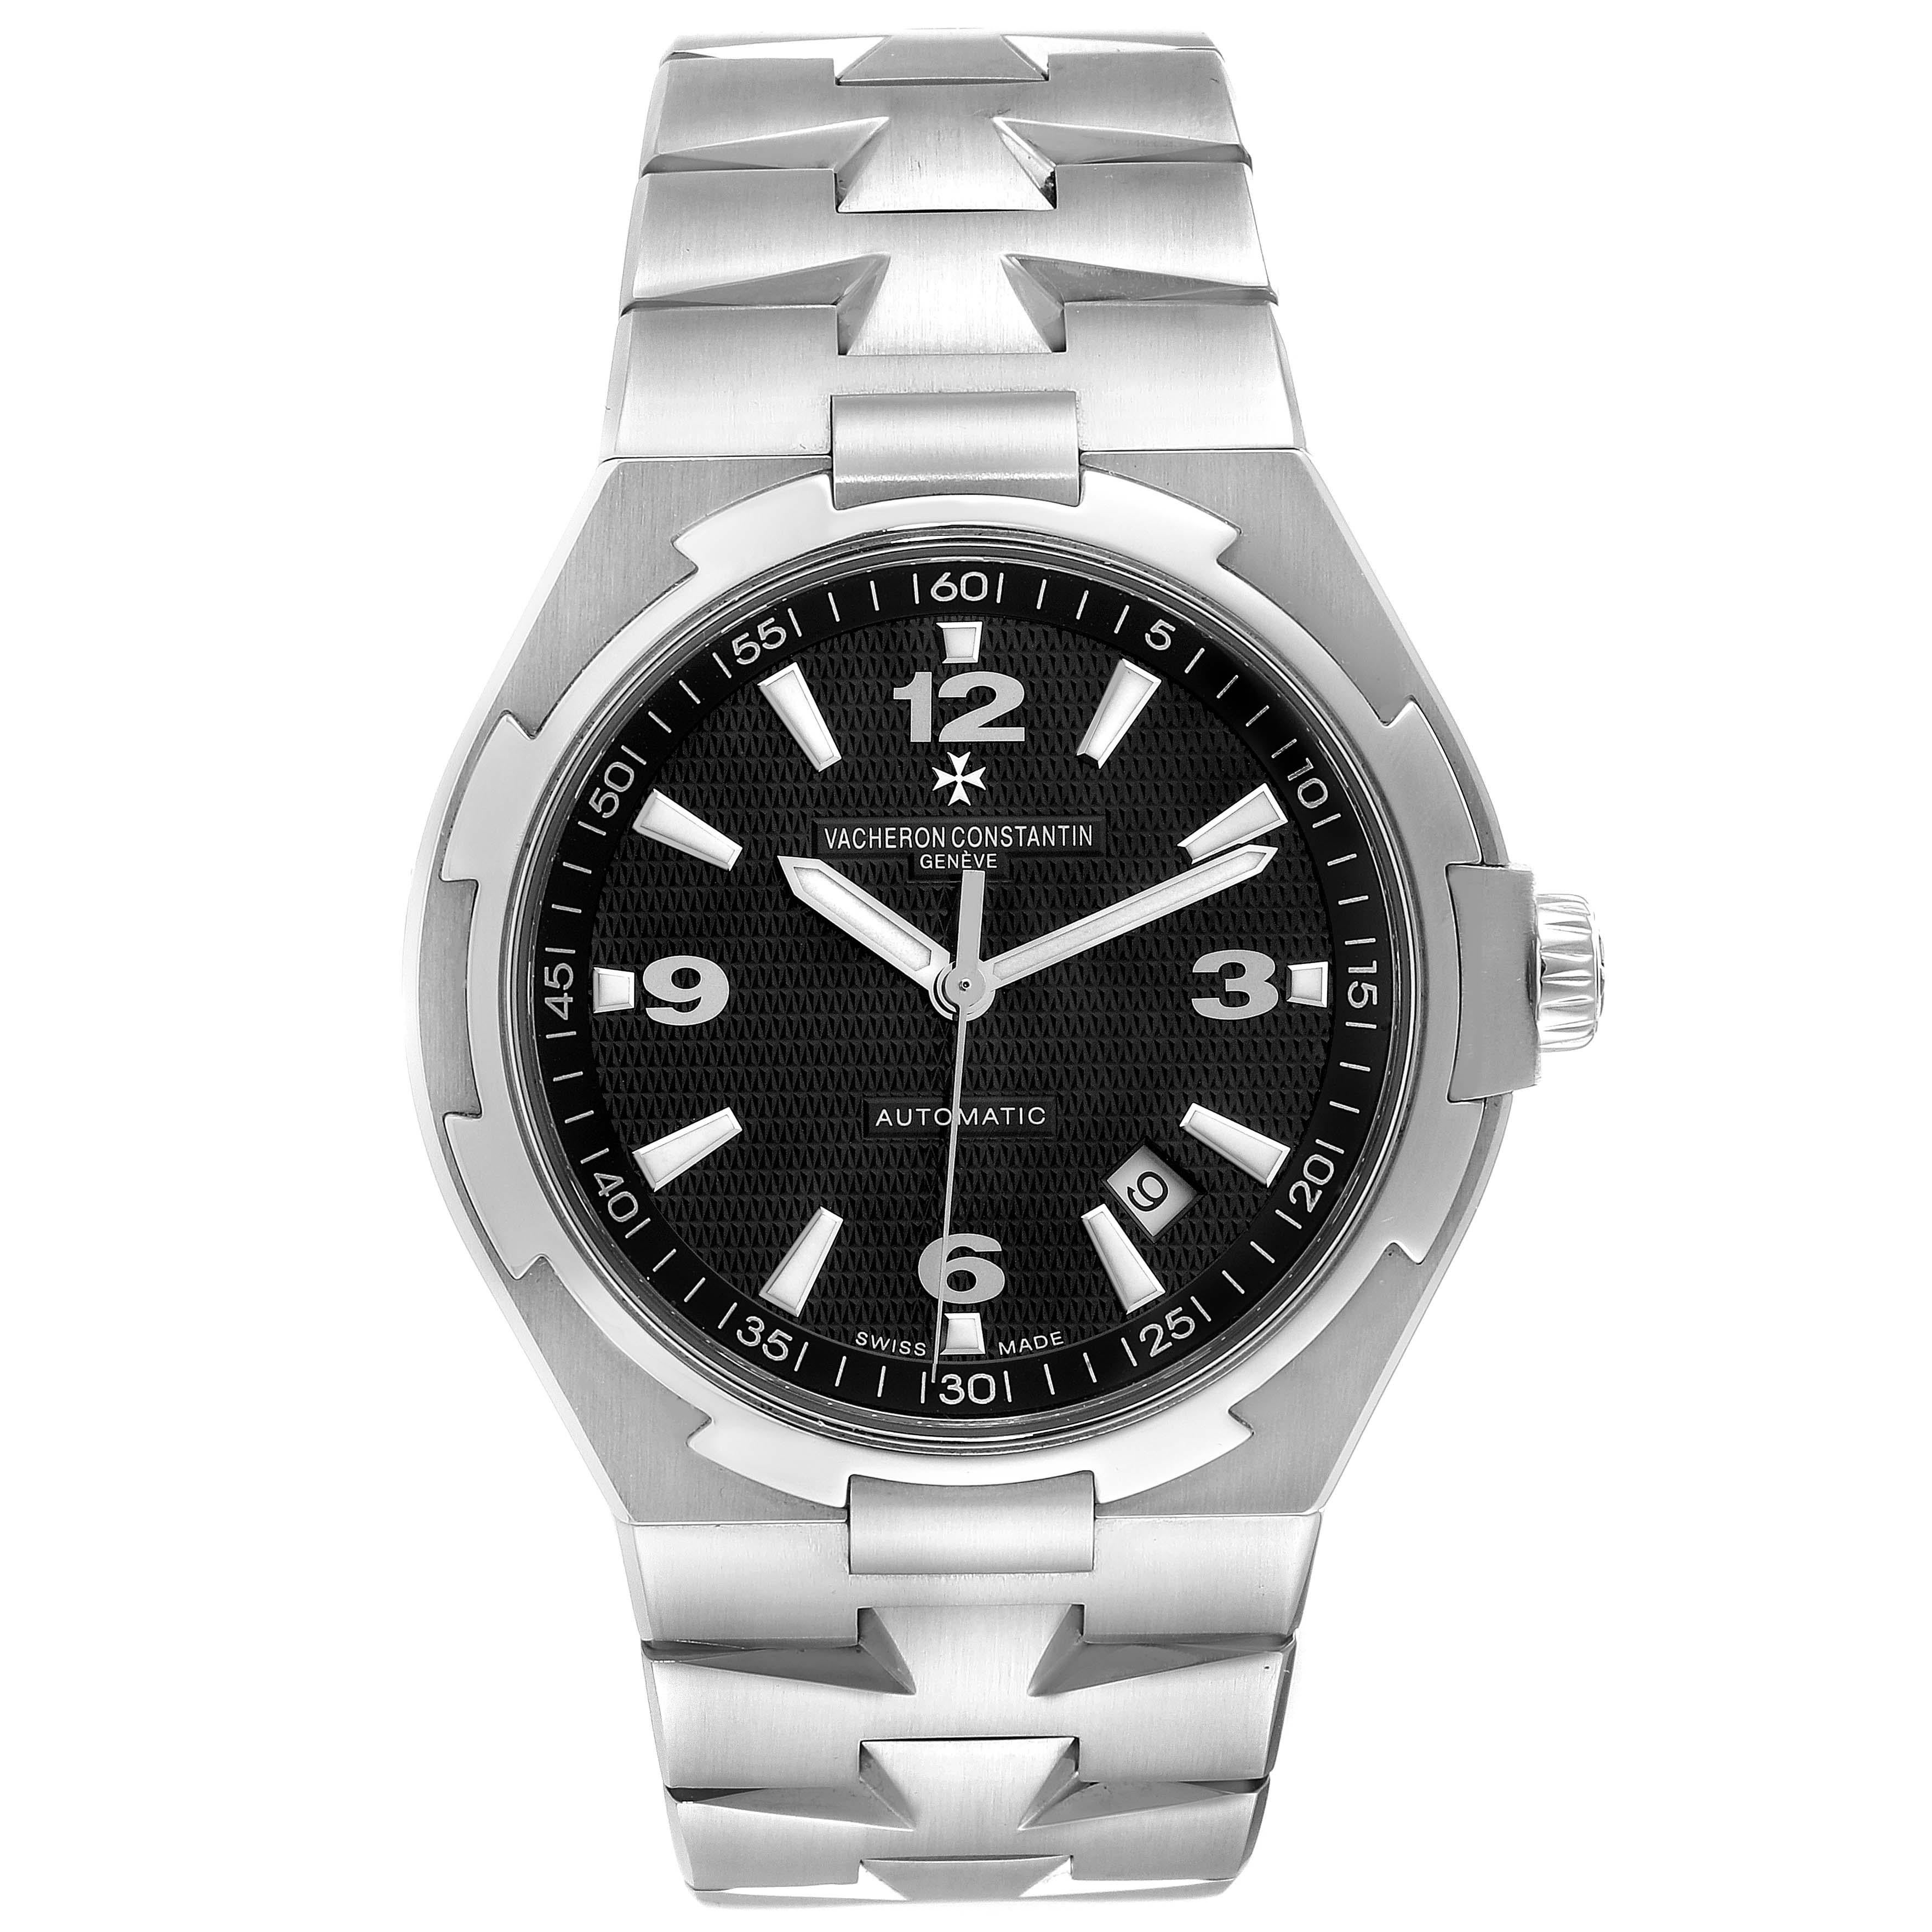 Vacheron Constantin Overseas Black Dial Steel Mens Watch 47040 Papers. Automatic self-winding movement. Brushed stainless steel case 42.5 mm in diameter. Screwed down crown with Vacheron Constantin logo. Solid case back with 'overseas' medallion.